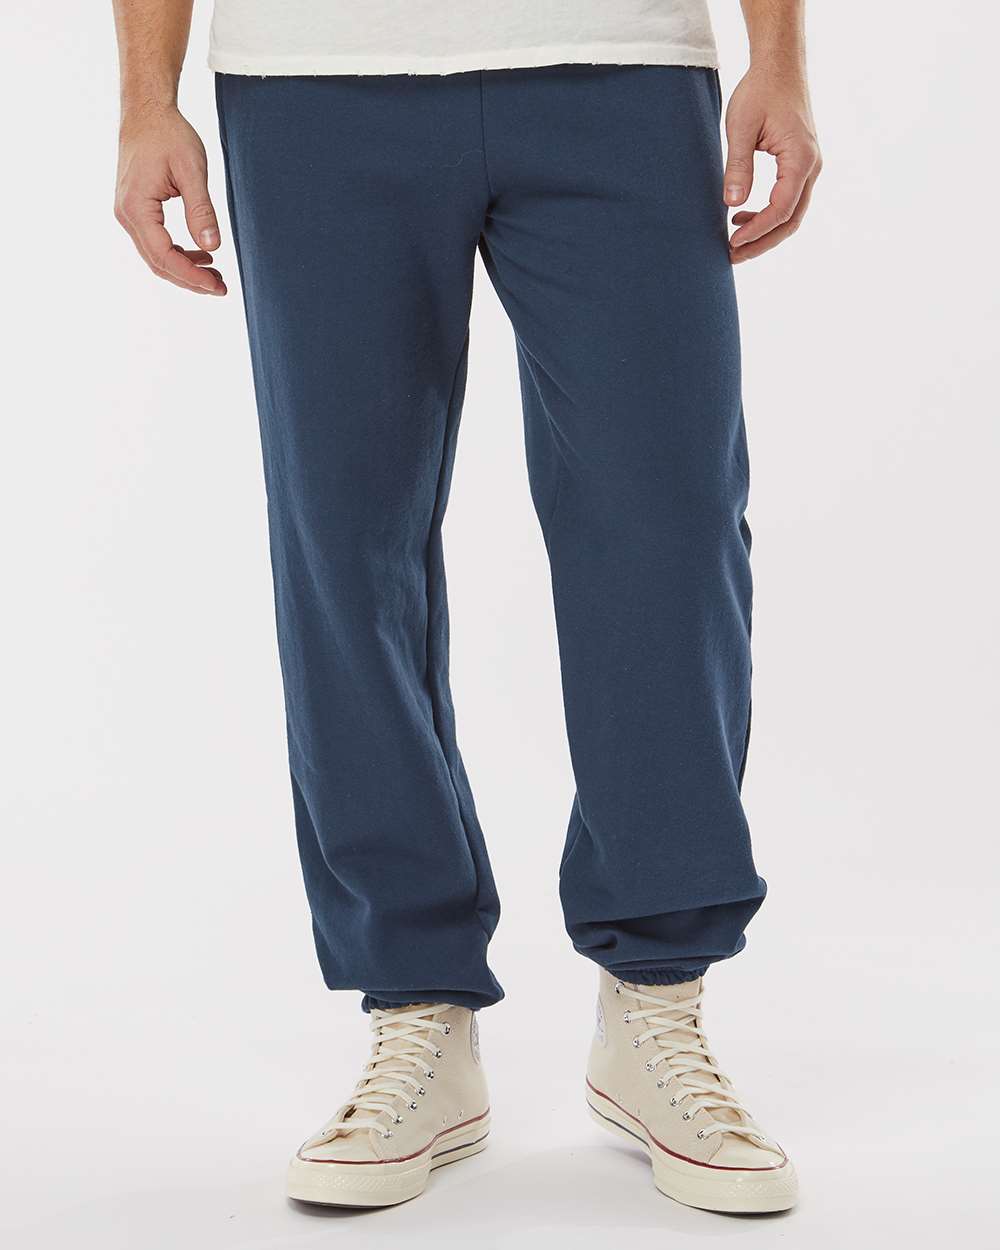 King Fashion Pocketed Sweatpants with Elastic Cuffs KF9012 #colormdl_Navy